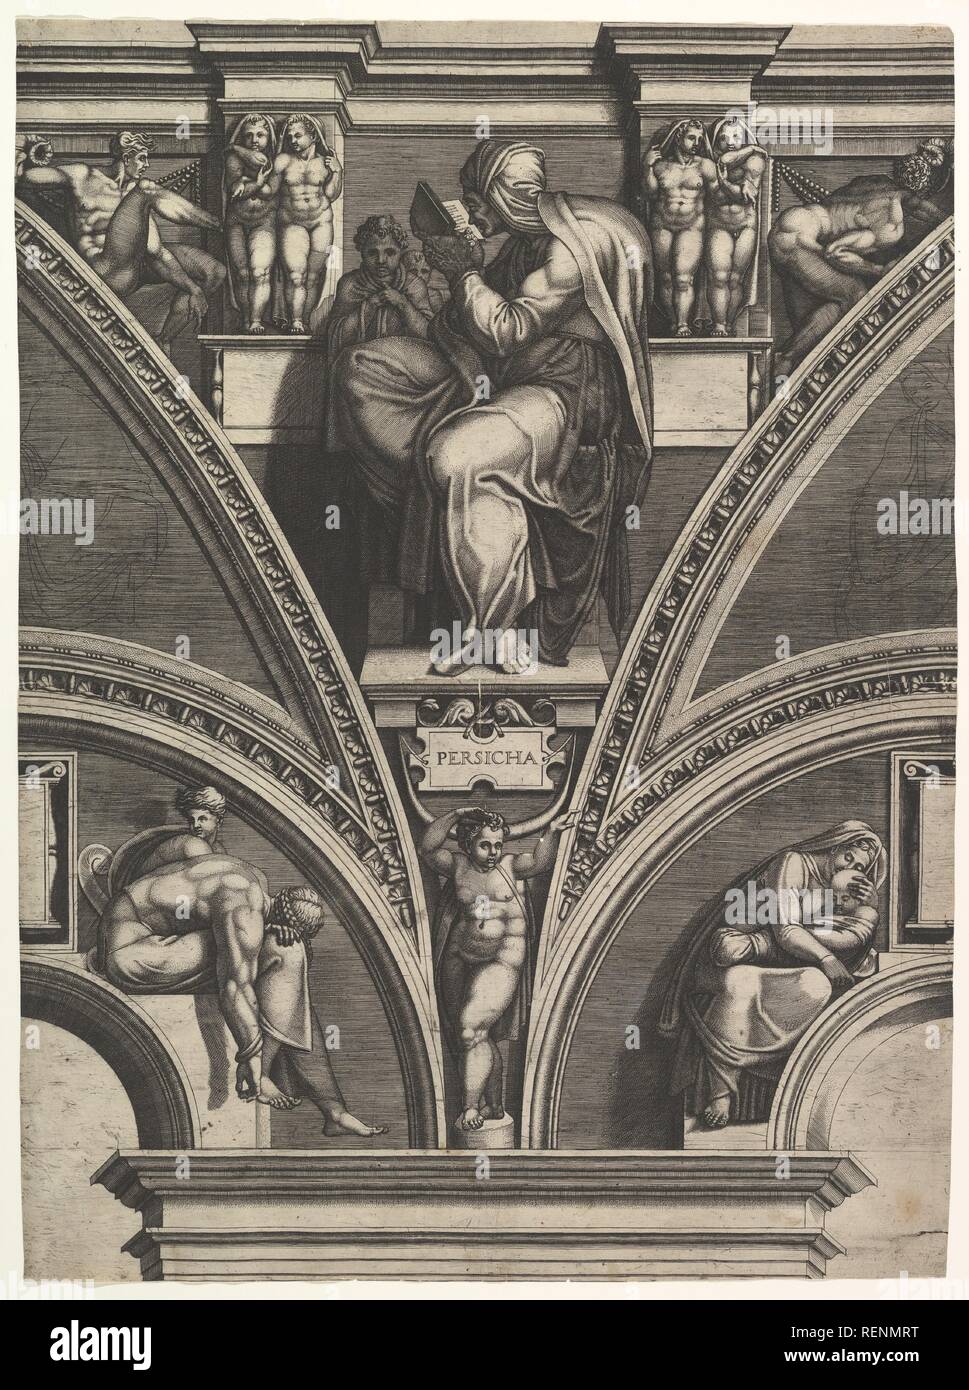 The Persian Sibyl; from the series of Prophets and Sibyls in the Sistine Chapel. Artist: After Michelangelo Buonarroti (Italian, Caprese 1475-1564 Rome); Giorgio Ghisi (Italian, Mantua ca. 1520-1582 Mantua). Dimensions: Sheet (Trimmed): 21 15/16 × 16 1/4 in. (55.8 × 41.3 cm). Date: 1570-75. Museum: Metropolitan Museum of Art, New York, USA. Stock Photo